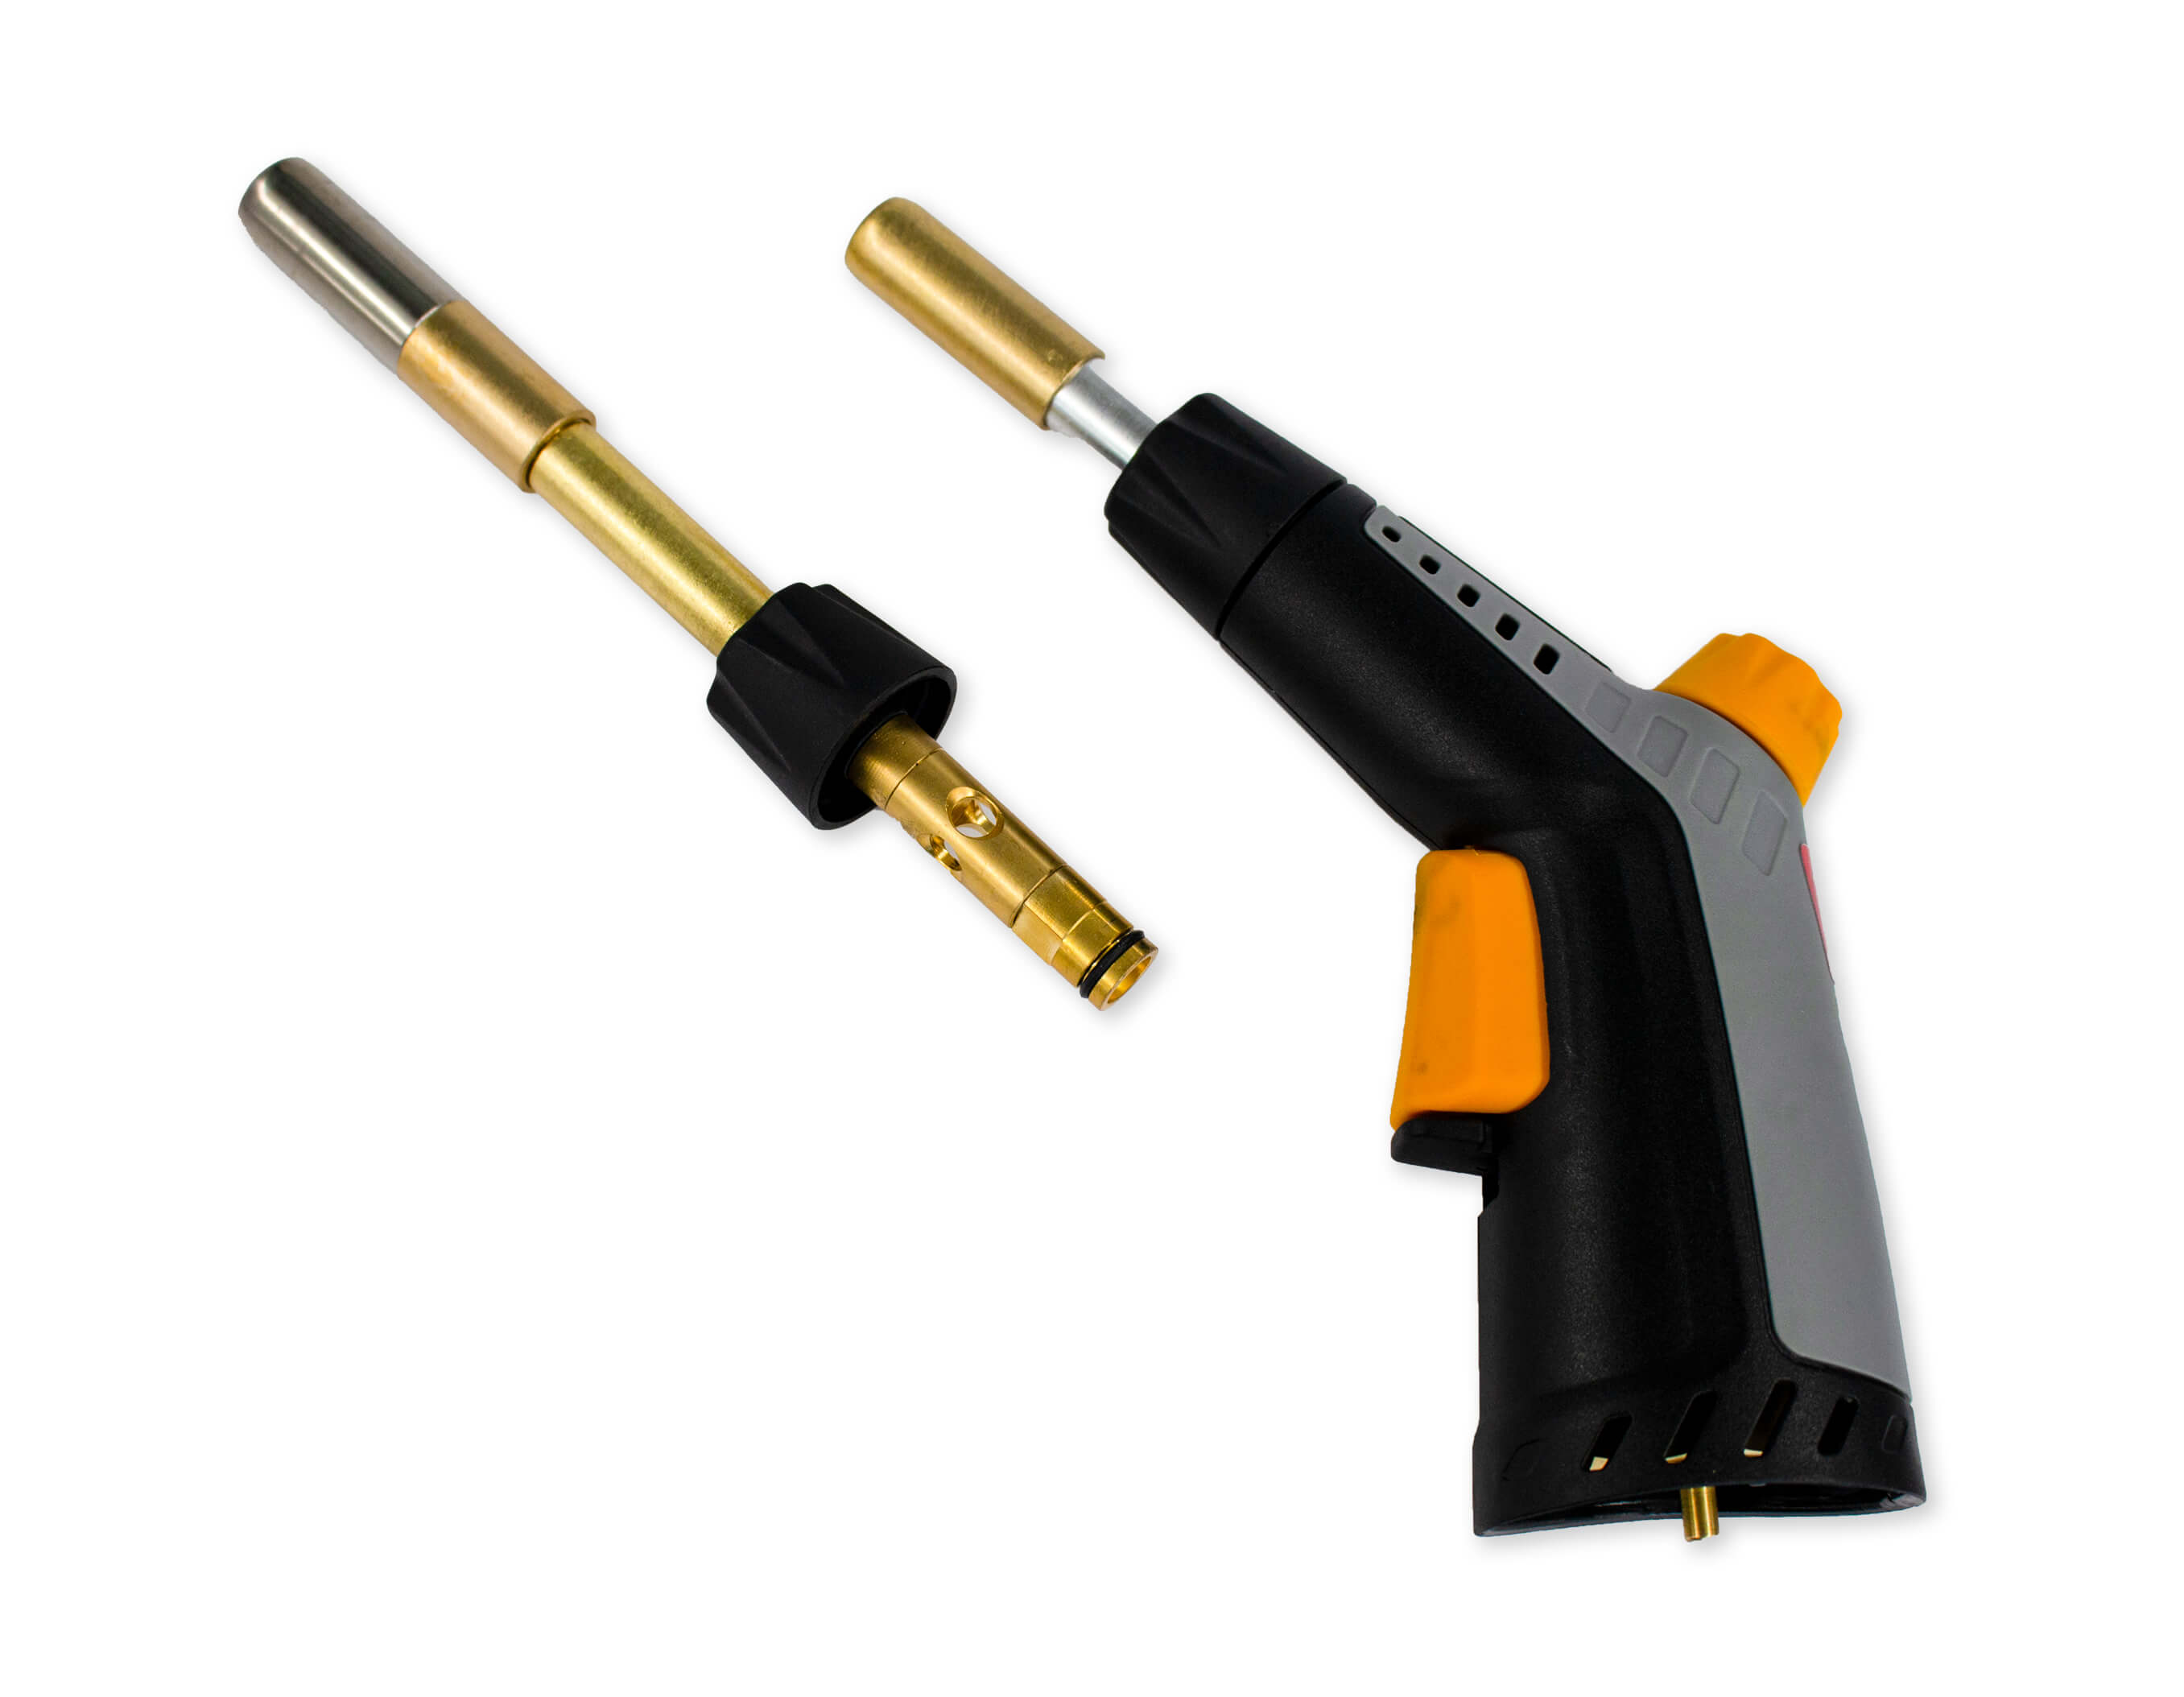 CYCLONE & PINPOINT BLOW TORCH KIT